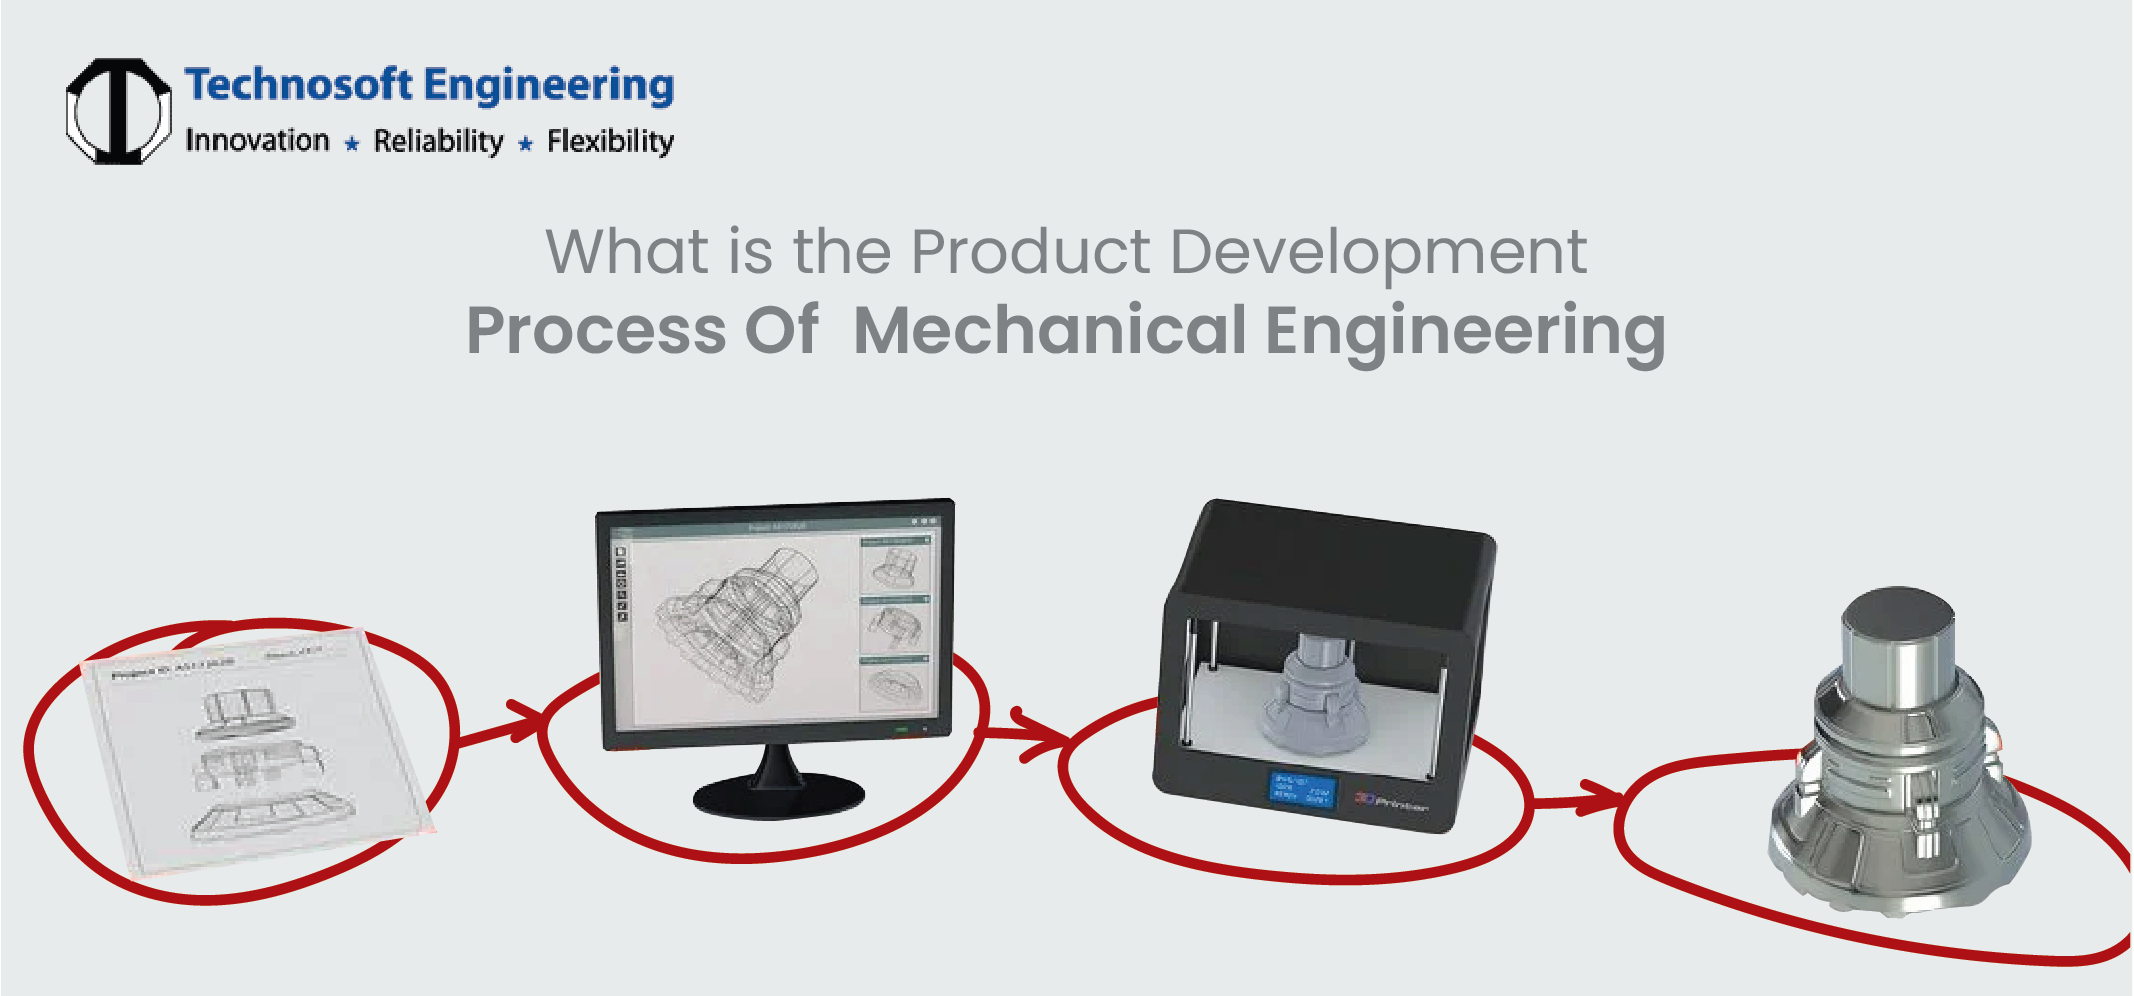 What Is The Product Development Process Of Mechanical Engineering?